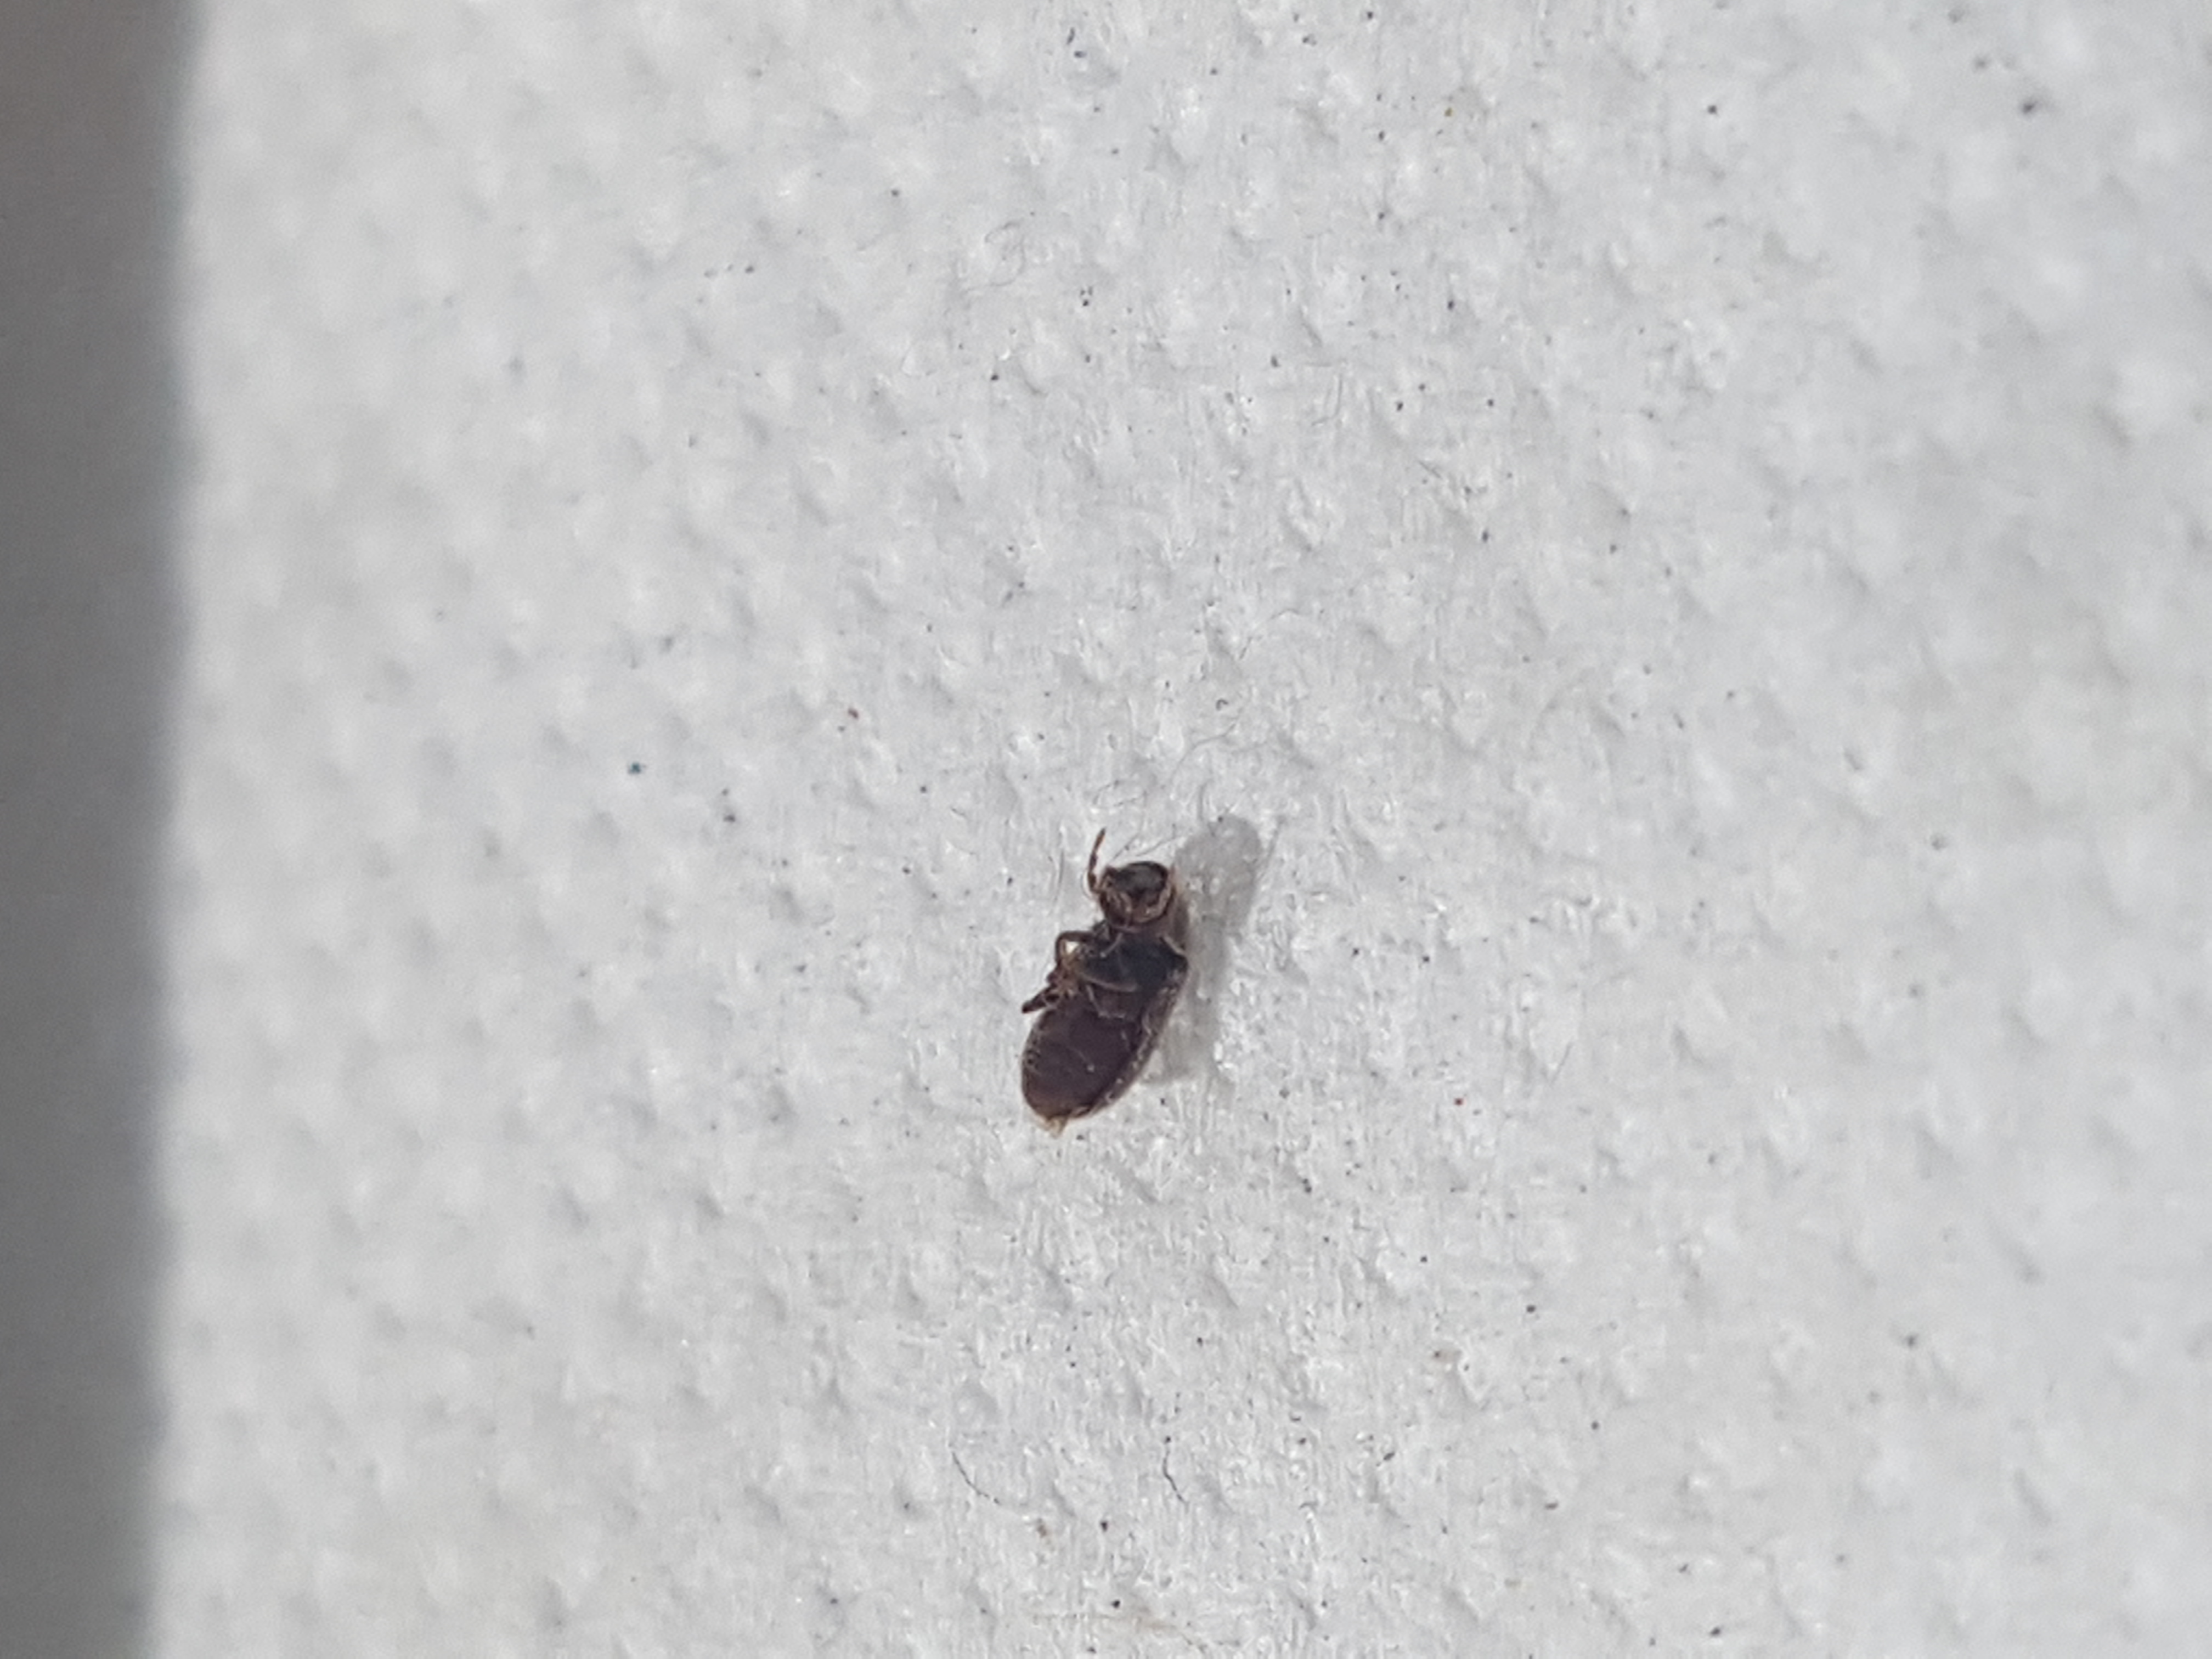 Natureplus Please Help Id These Small Black Flying Bugs On Window Sill 